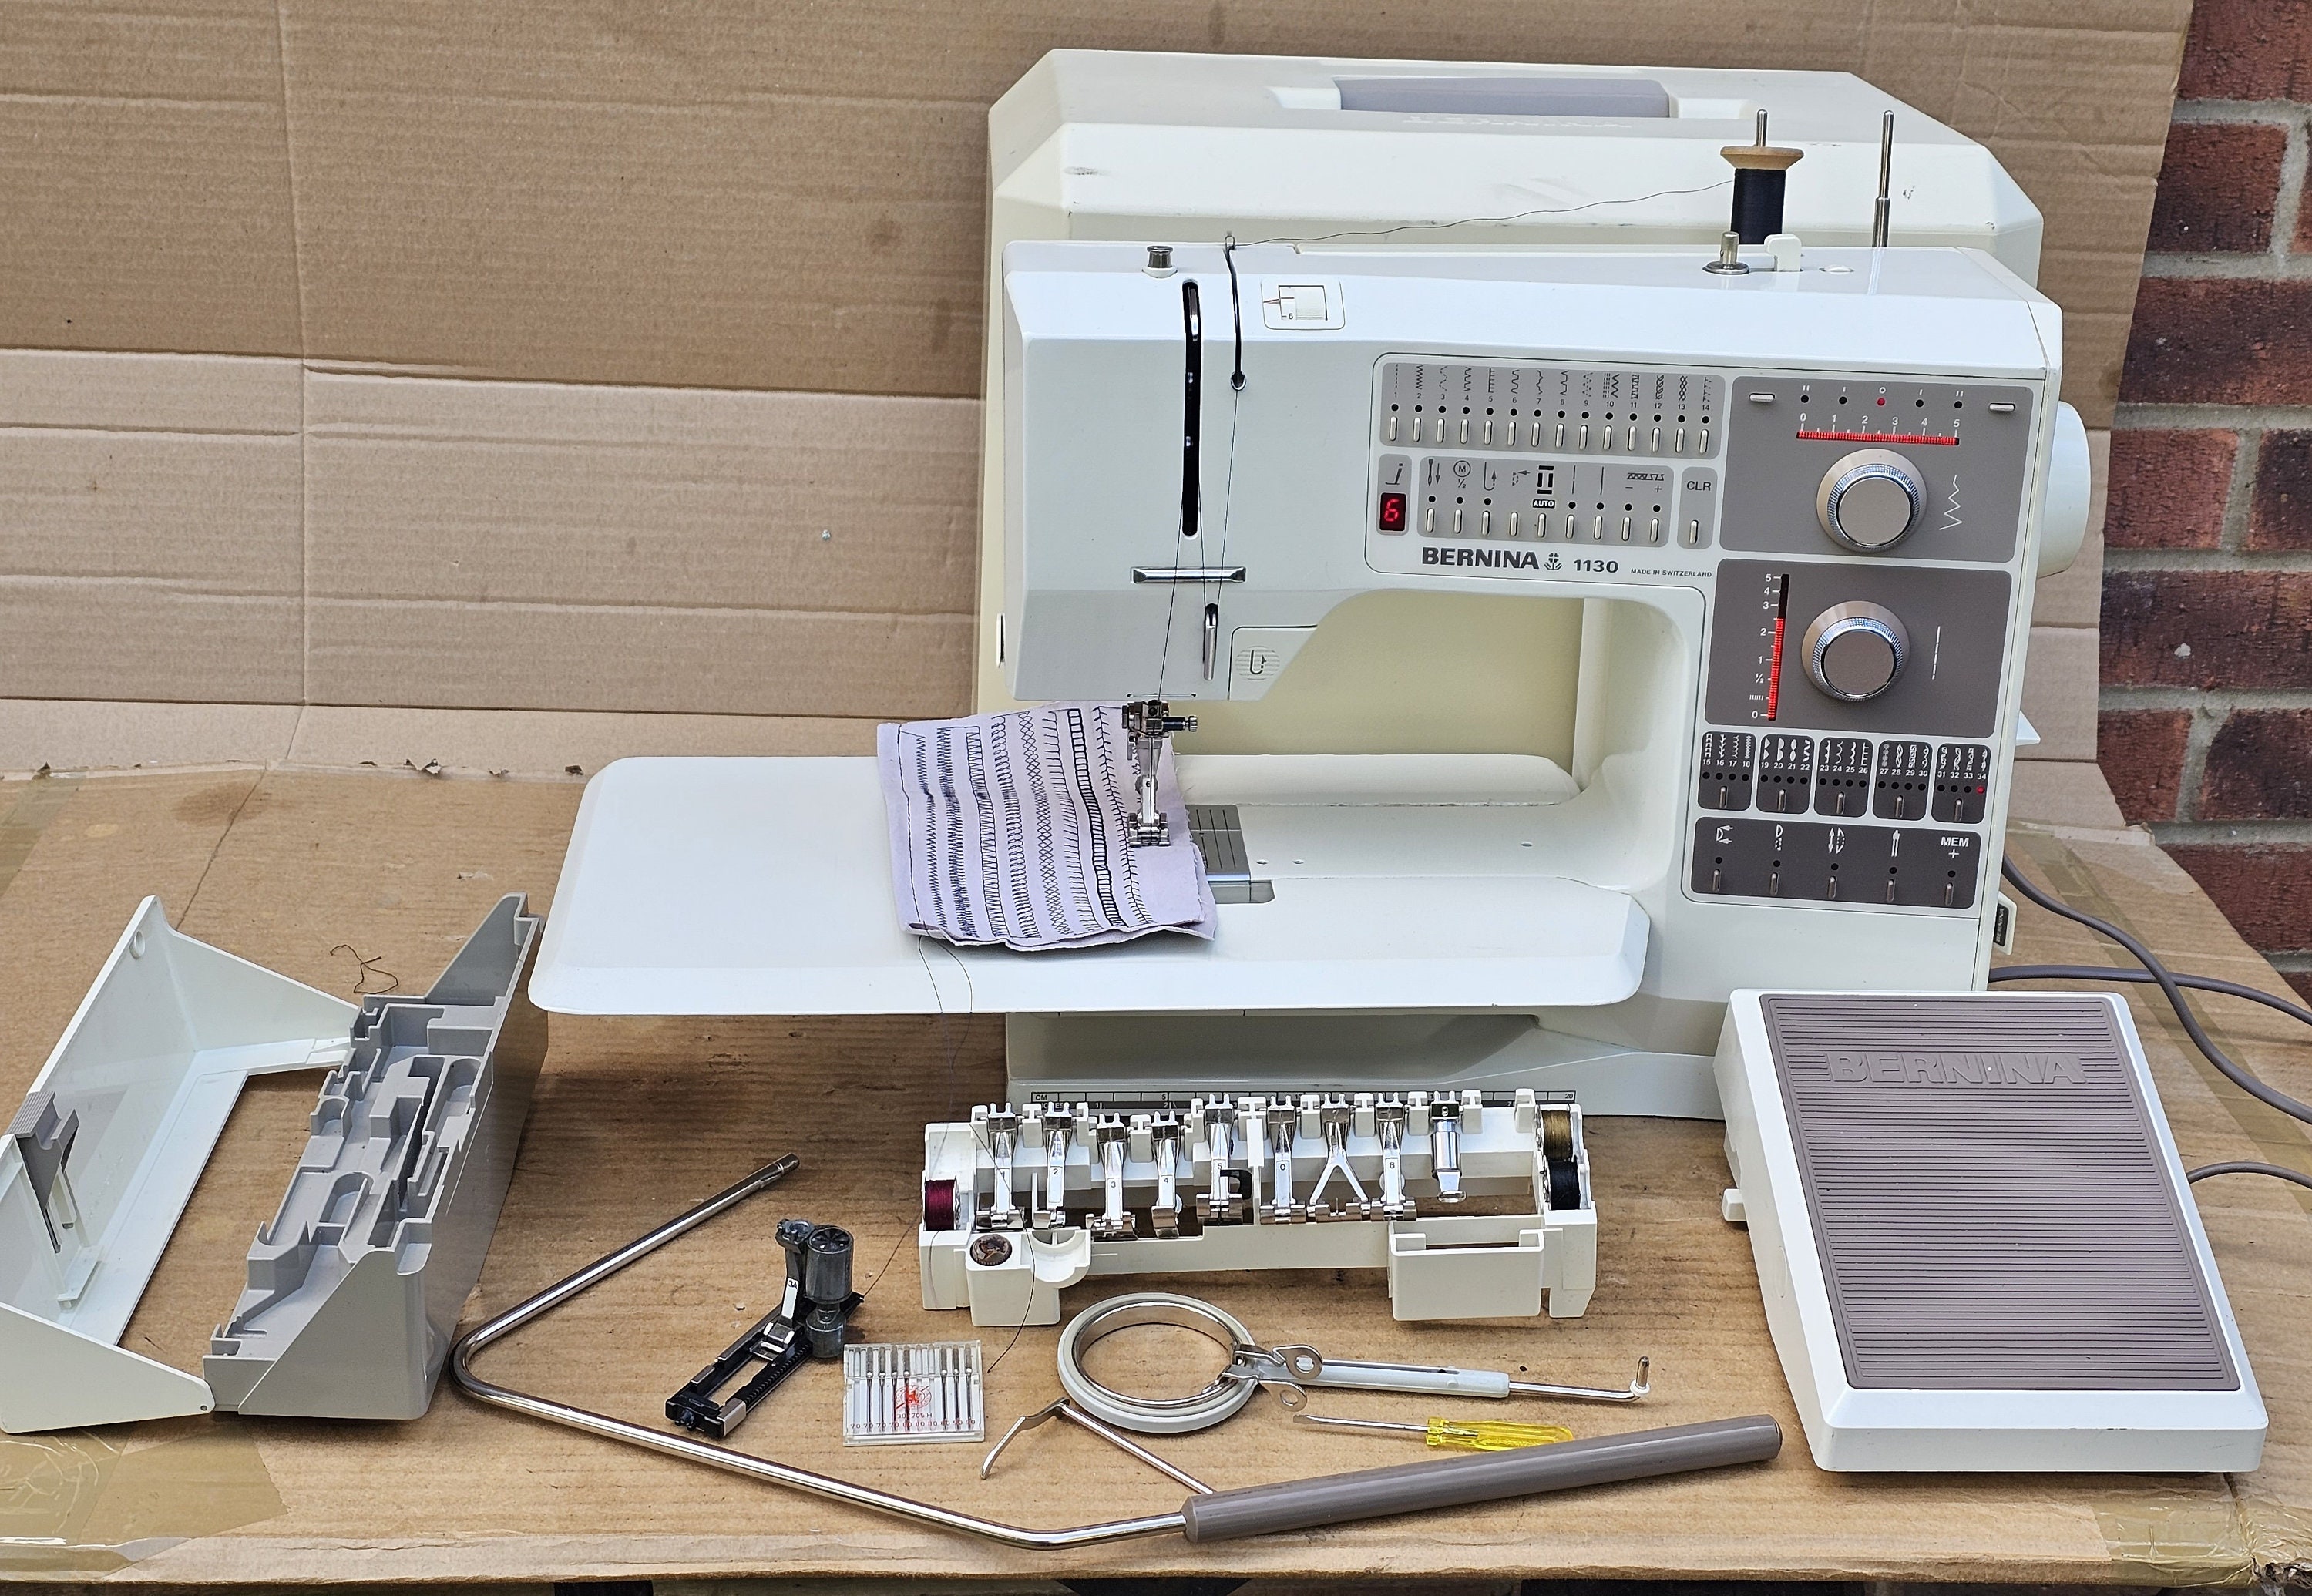 SEWING MACHINE 🧵 for beginners. Code: 80523UPZ #finds